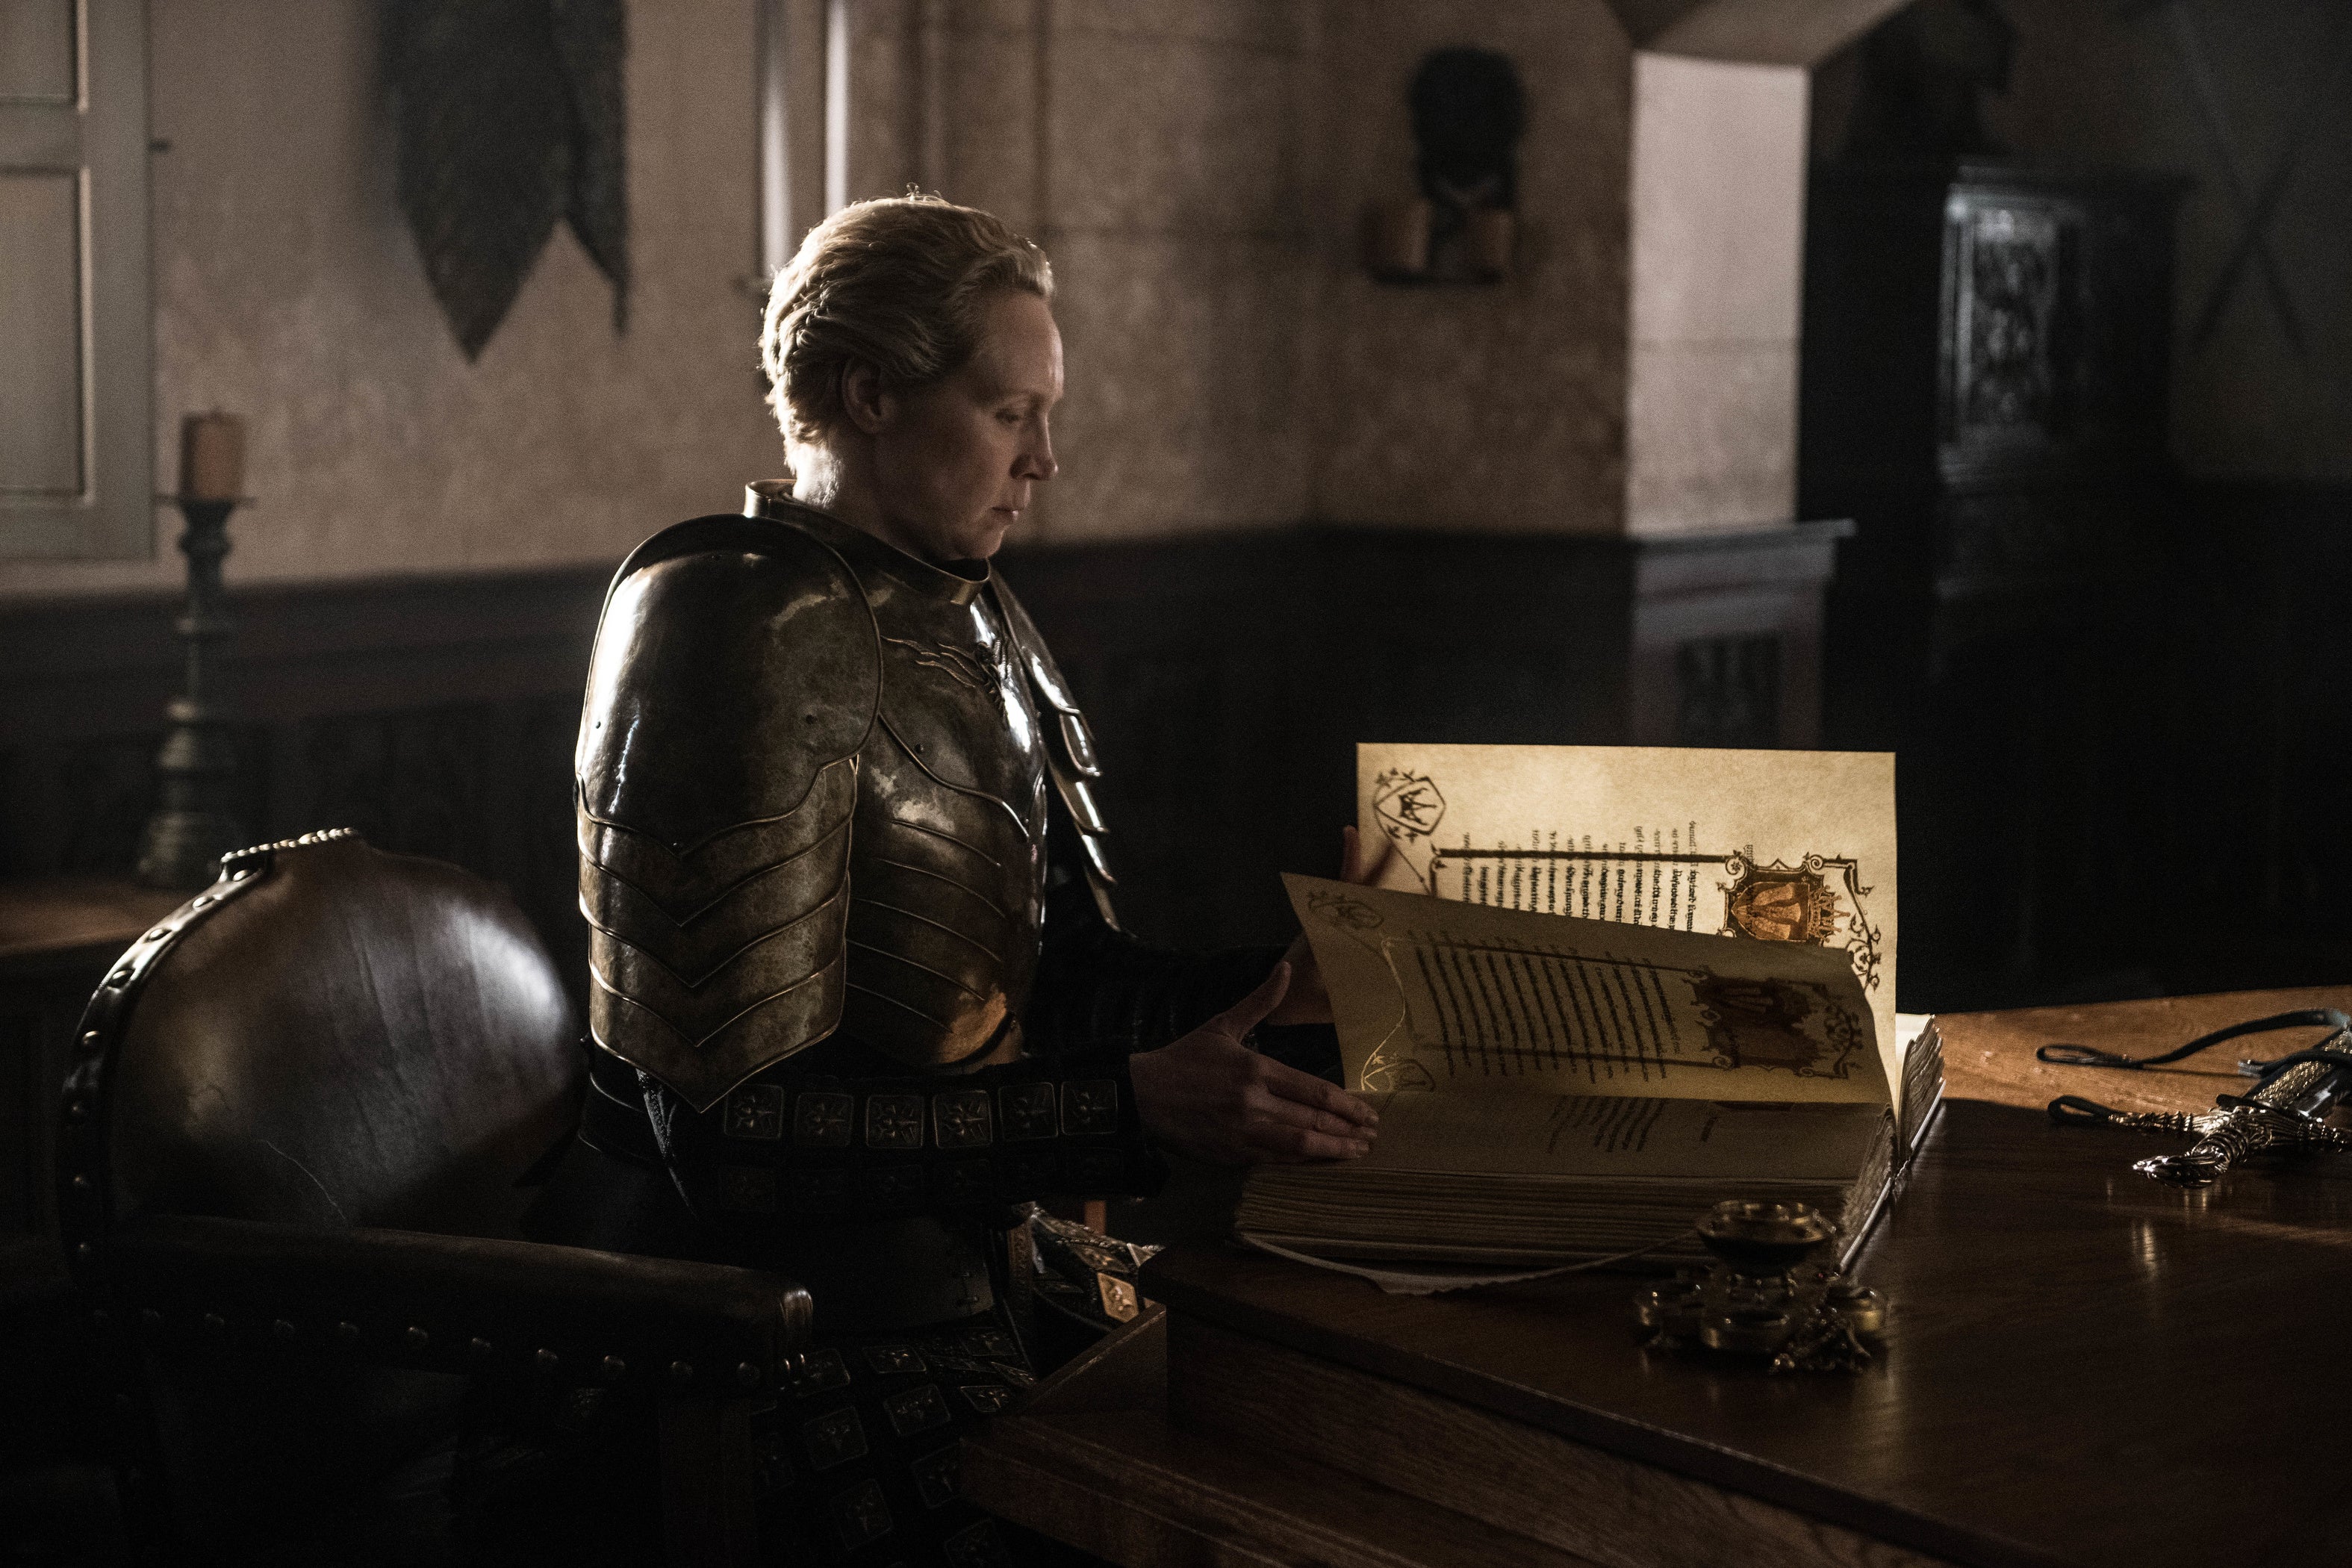 Gwendoline Christine as Brienne sits wearing armor, leaving through a large bound book.